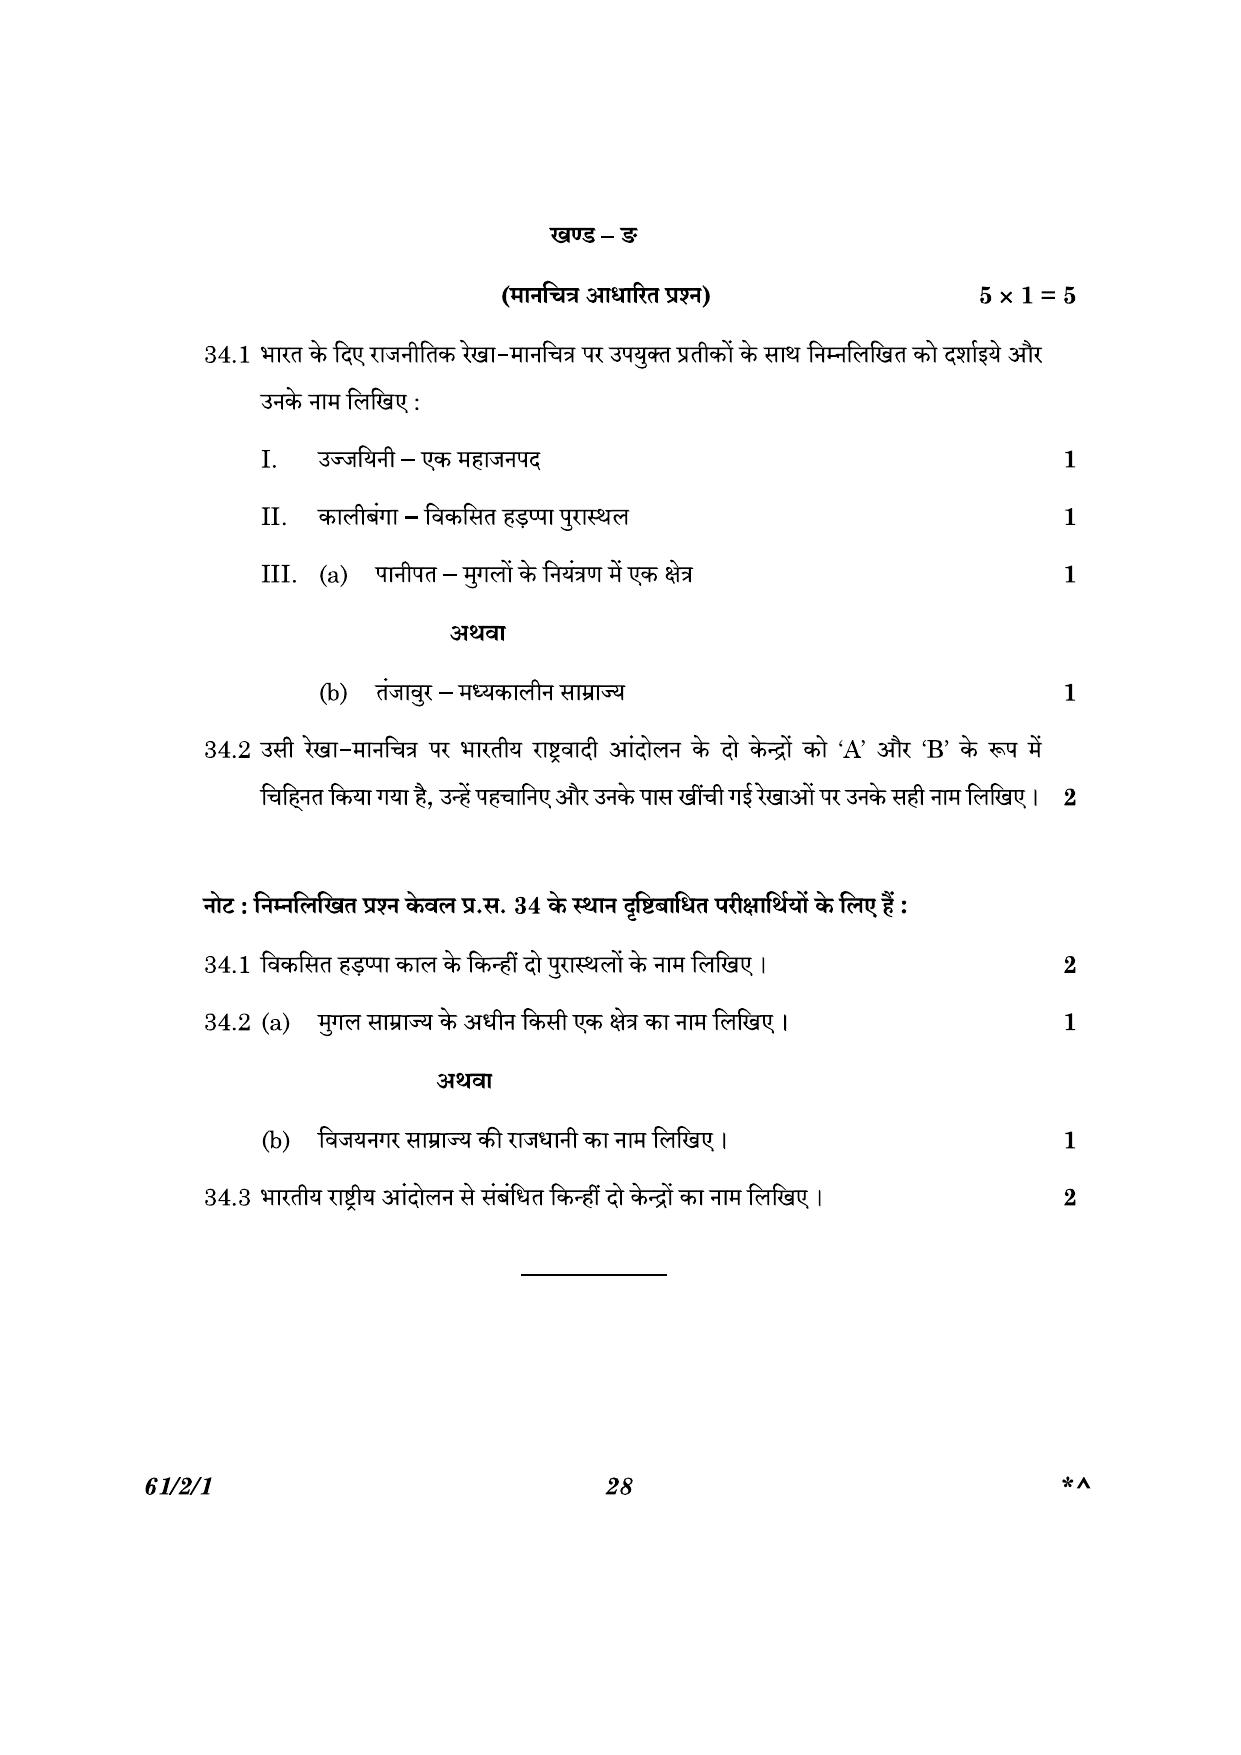 CBSE Class 12 61-2-1 History 2023 Question Paper - Page 28